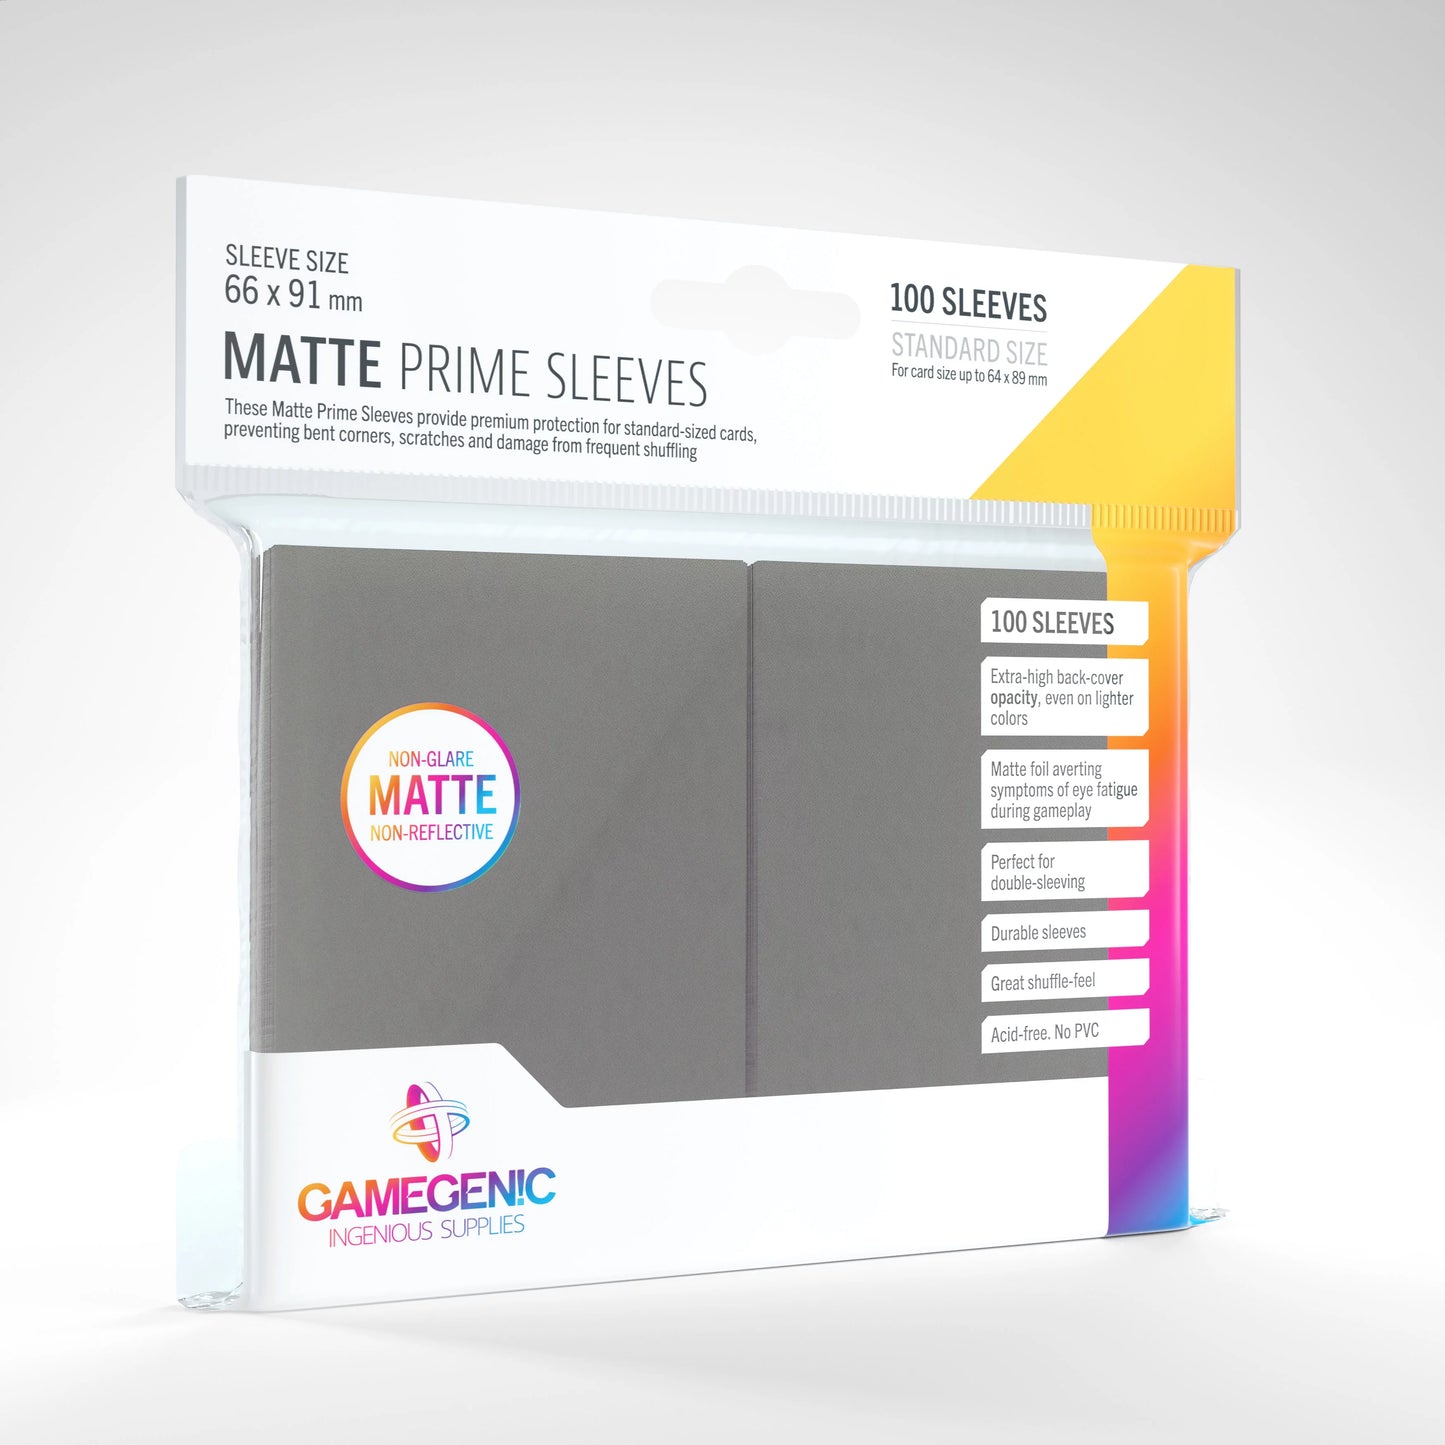 Gamegenic - 100 Matte Prime Sleeves Standard Size 66 x 91 mm